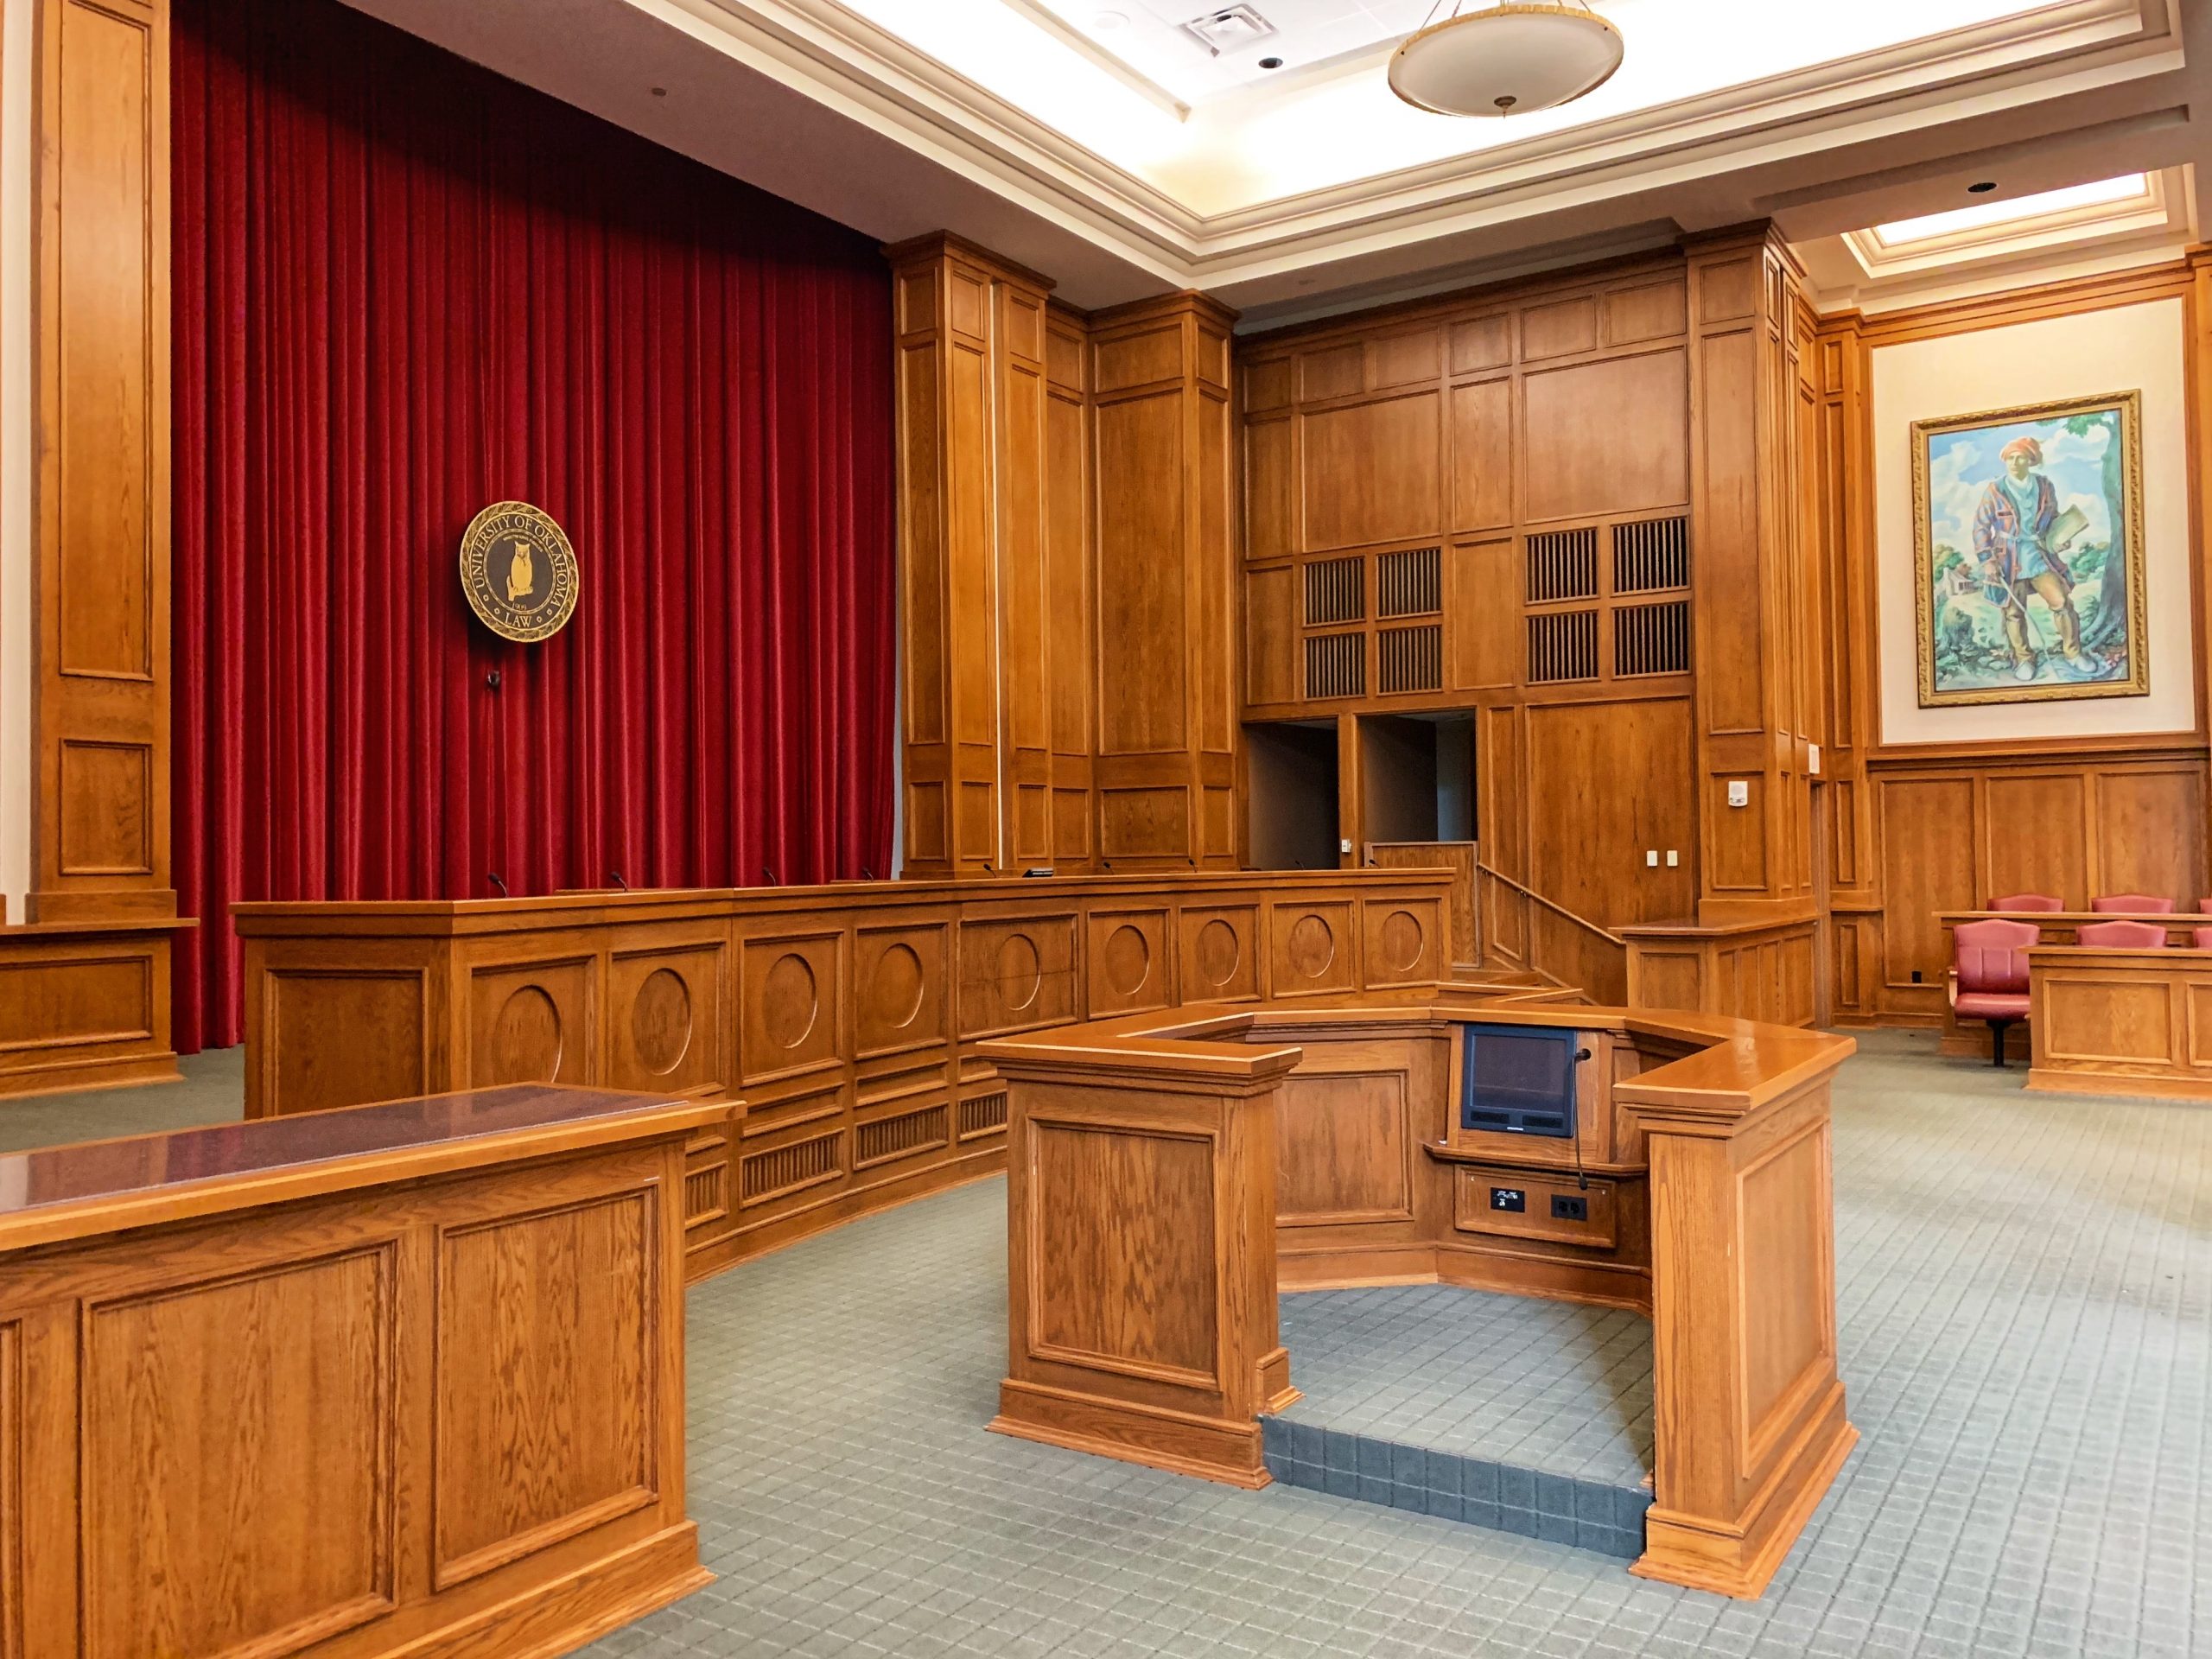 Both go to a courtroom that looks like this, but civil and criminal cases are different.